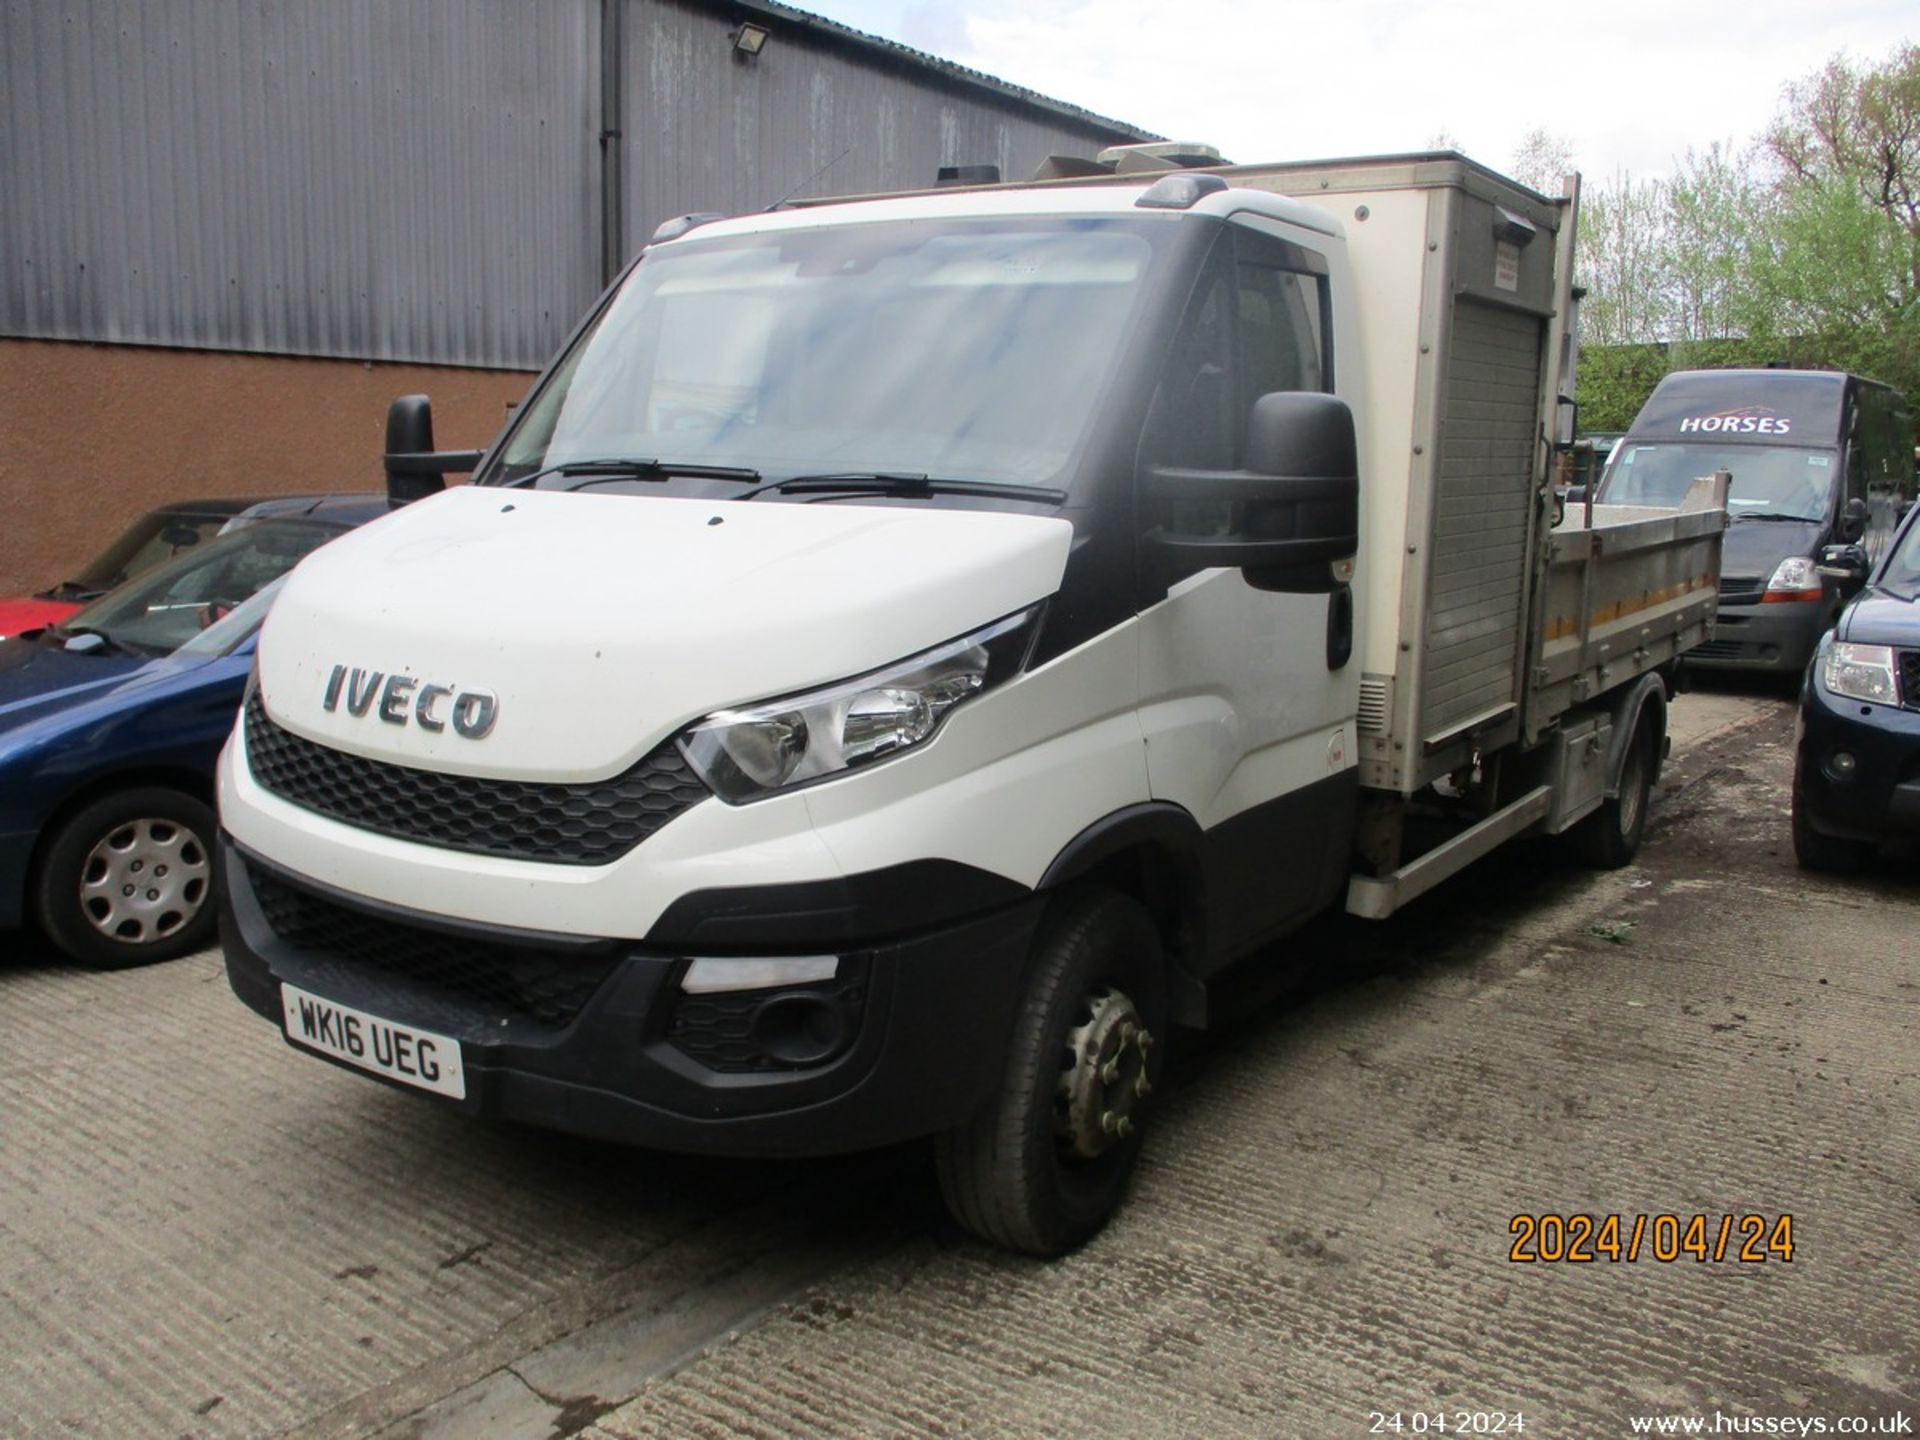 16/16 IVECO DAILY 70C17 - 2998cc 2dr Tipper (White, 193k) - Image 4 of 28